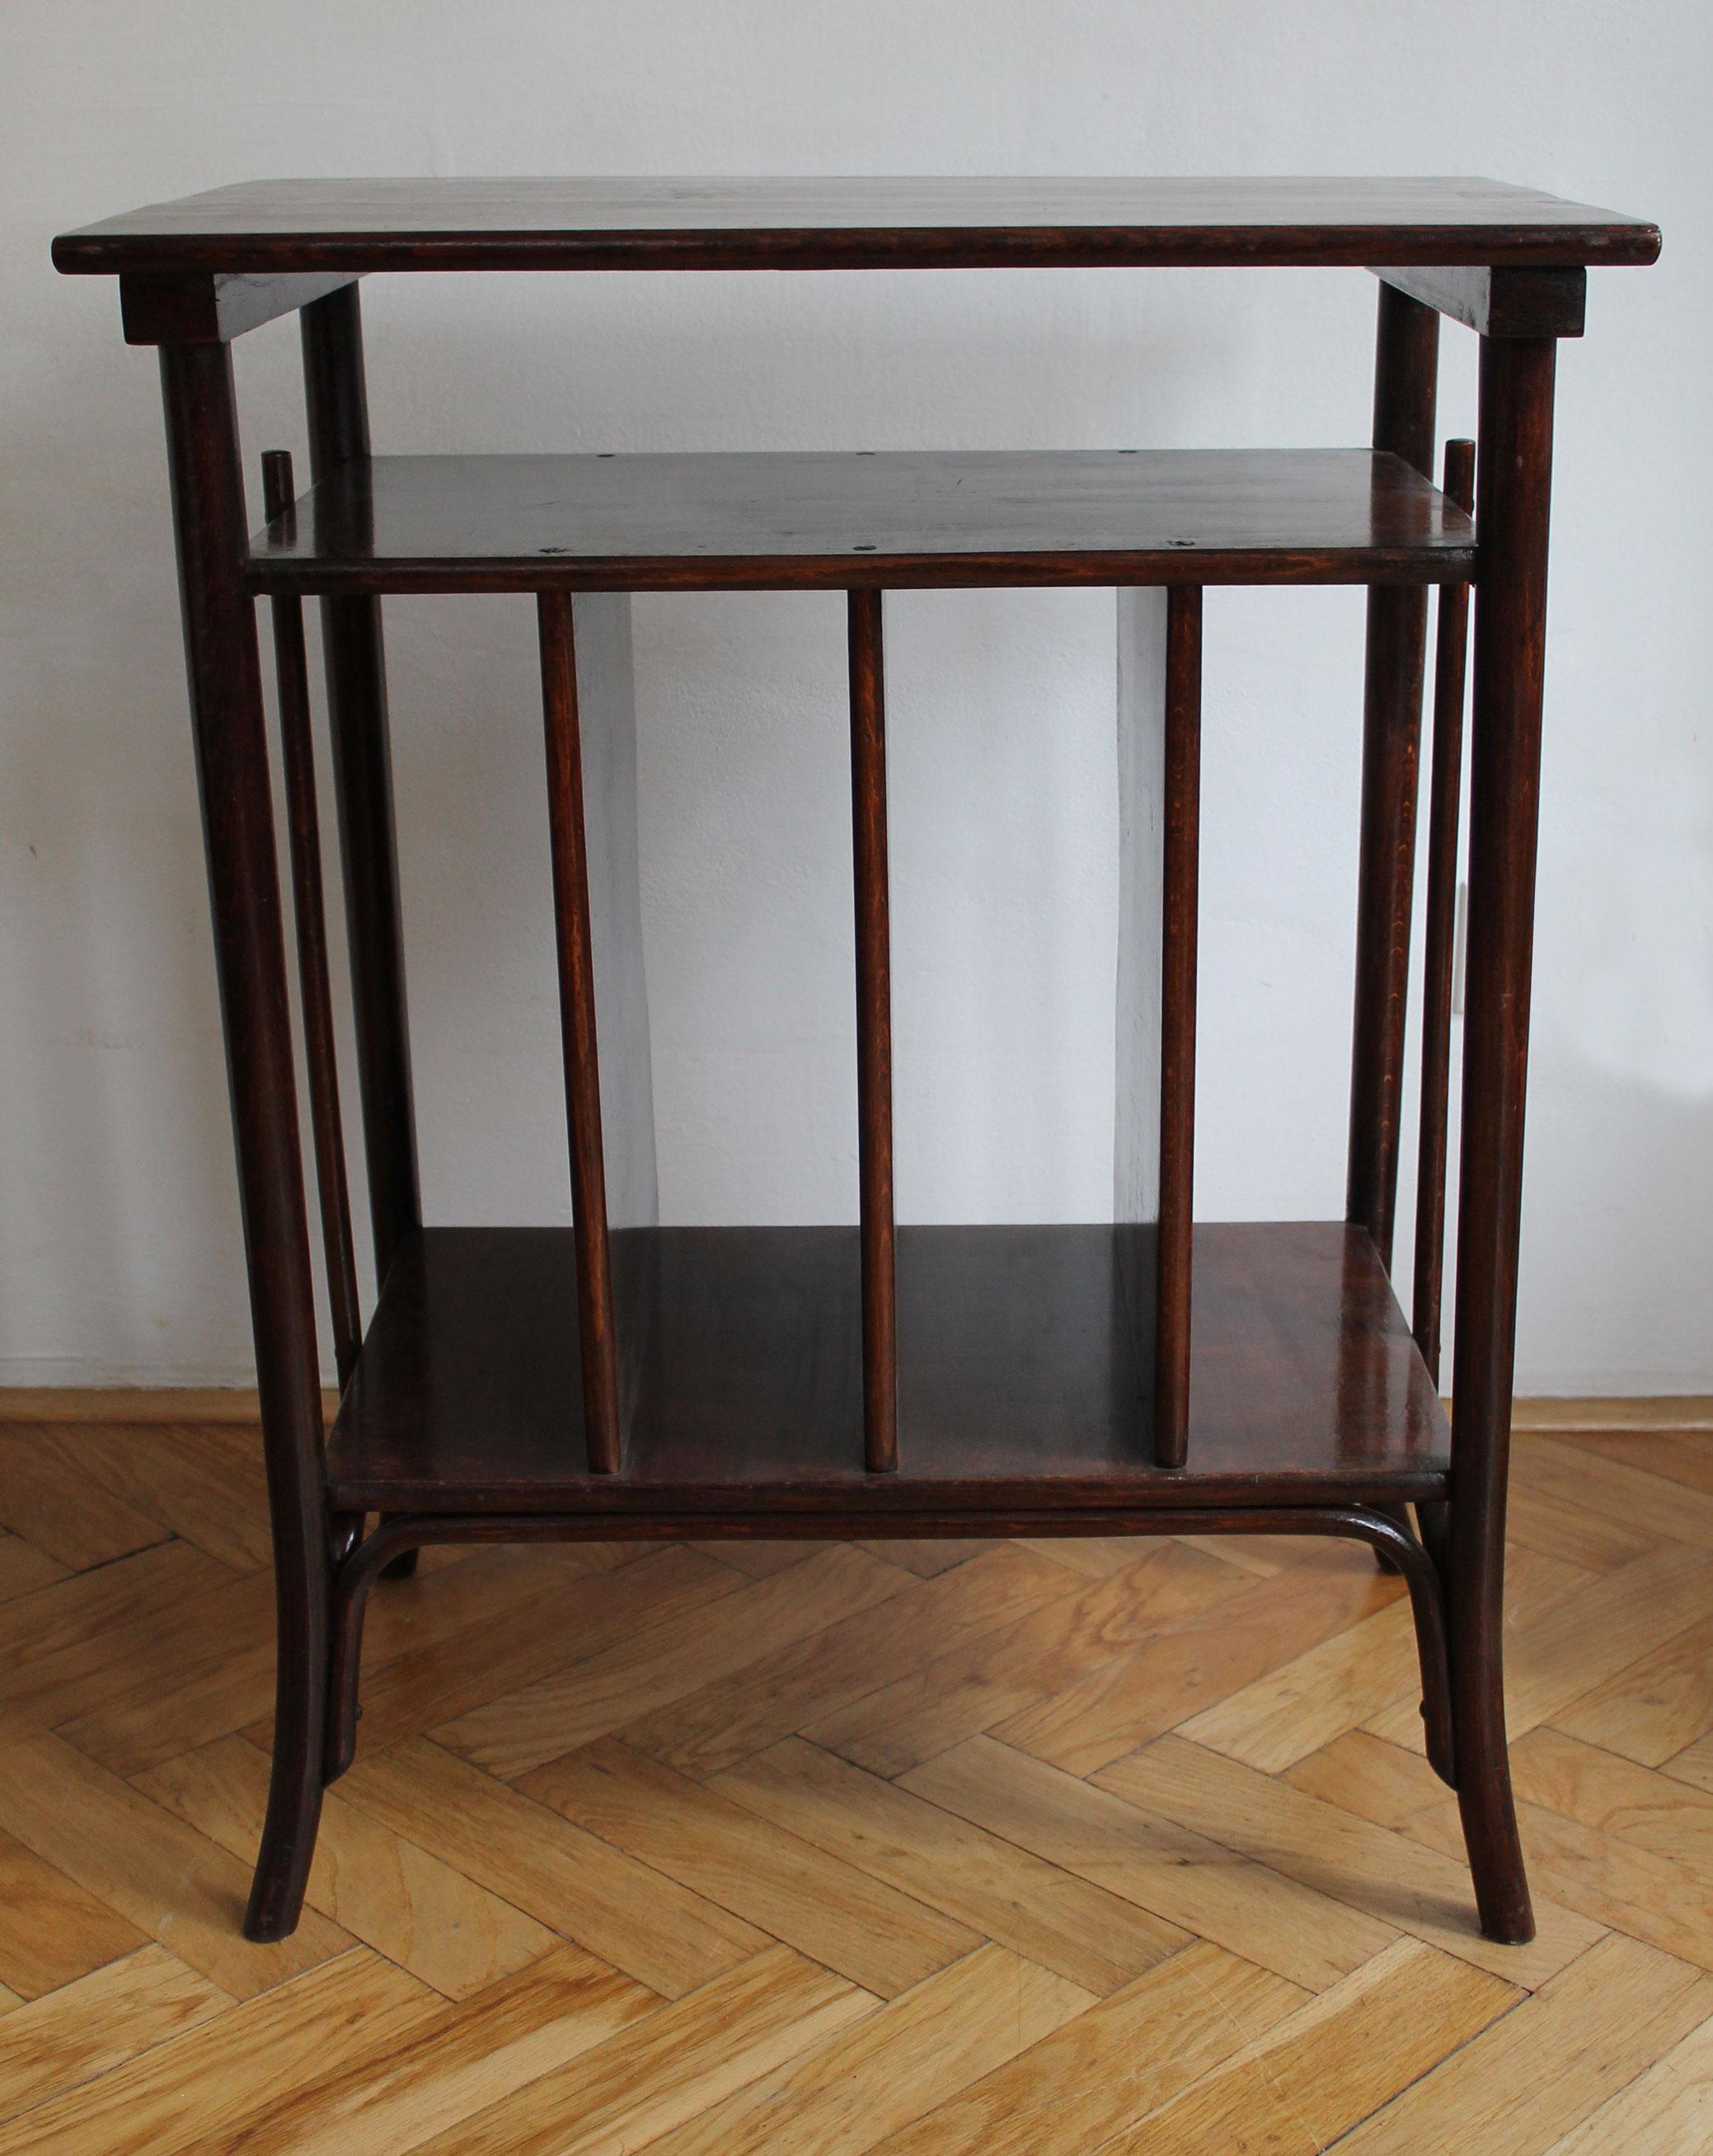 Early 20th Century 1910's Art Nouveau Table by Gebrüder Thonet For Sale